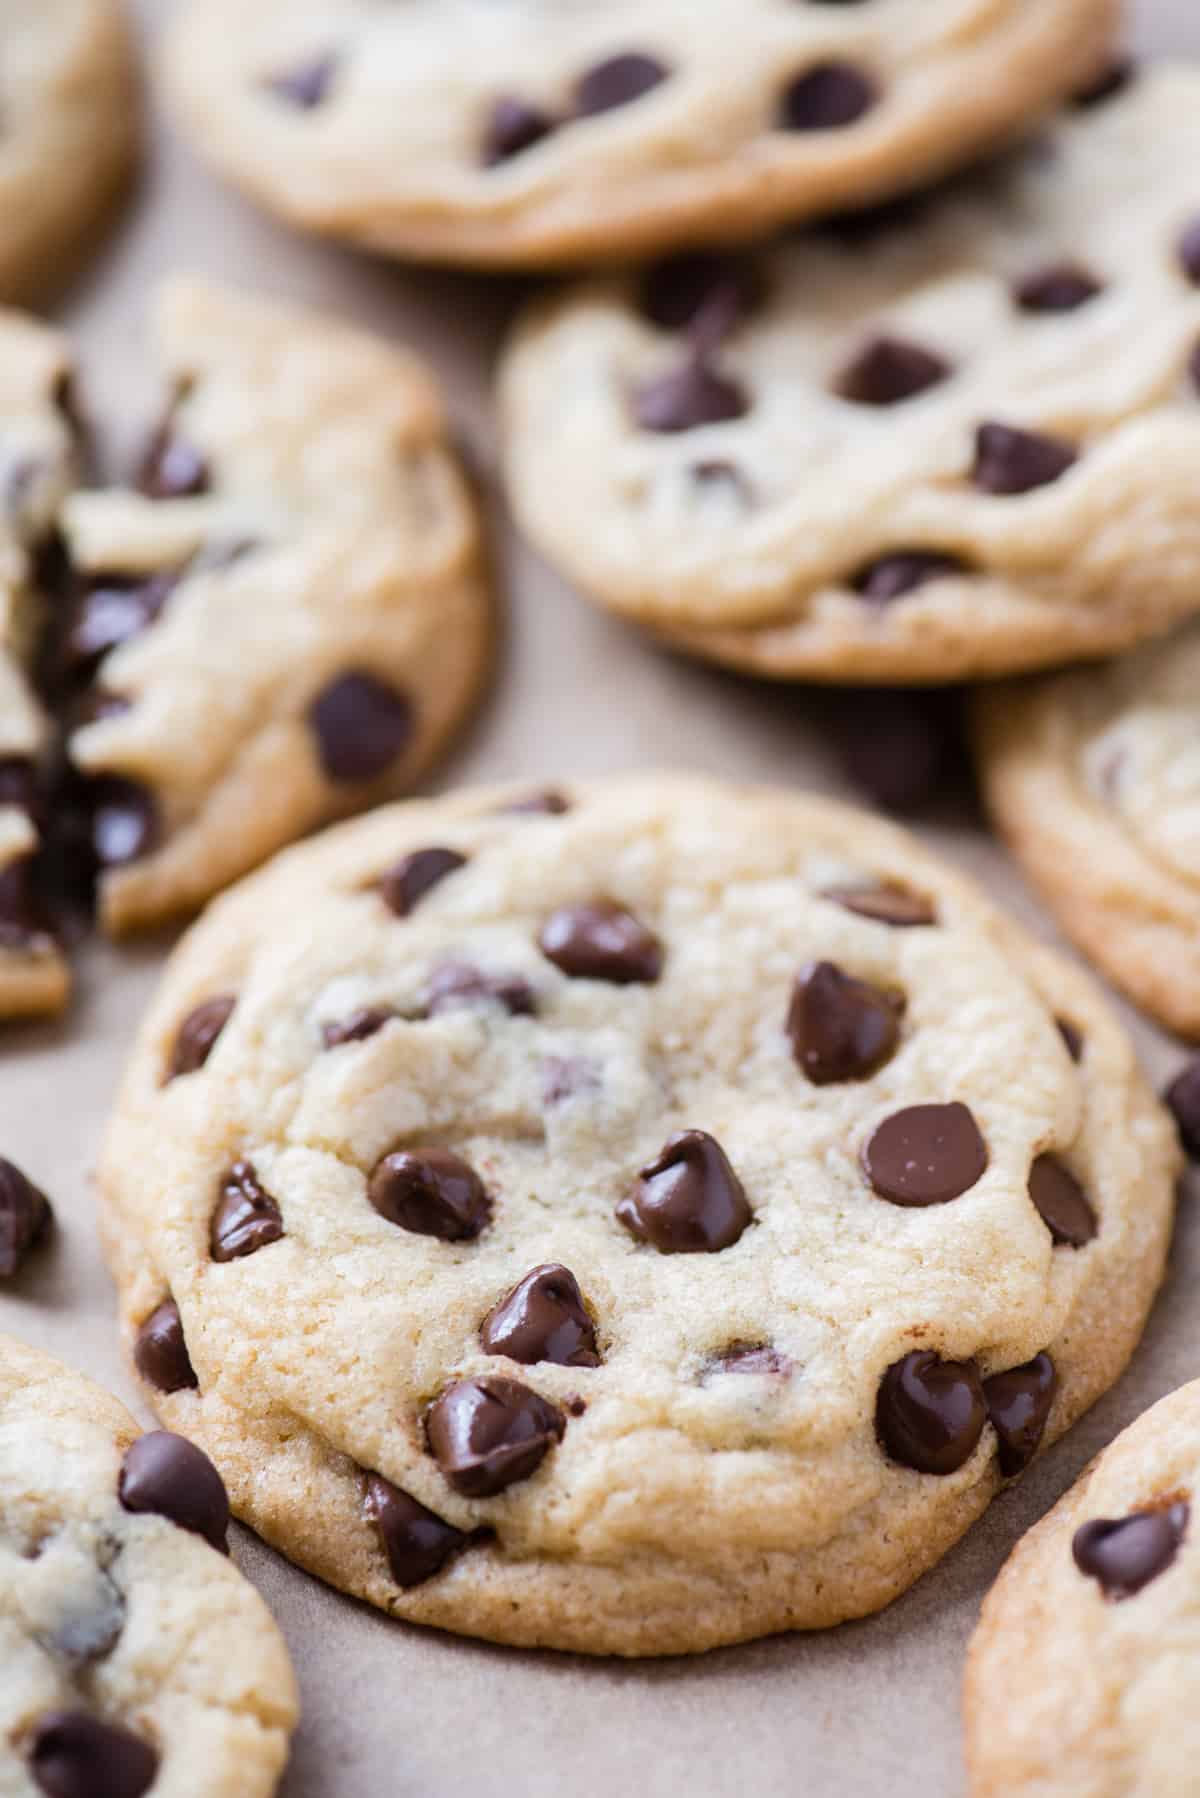 one chocolate chip cookie in focus on brown parchment paper with more cookies in the background